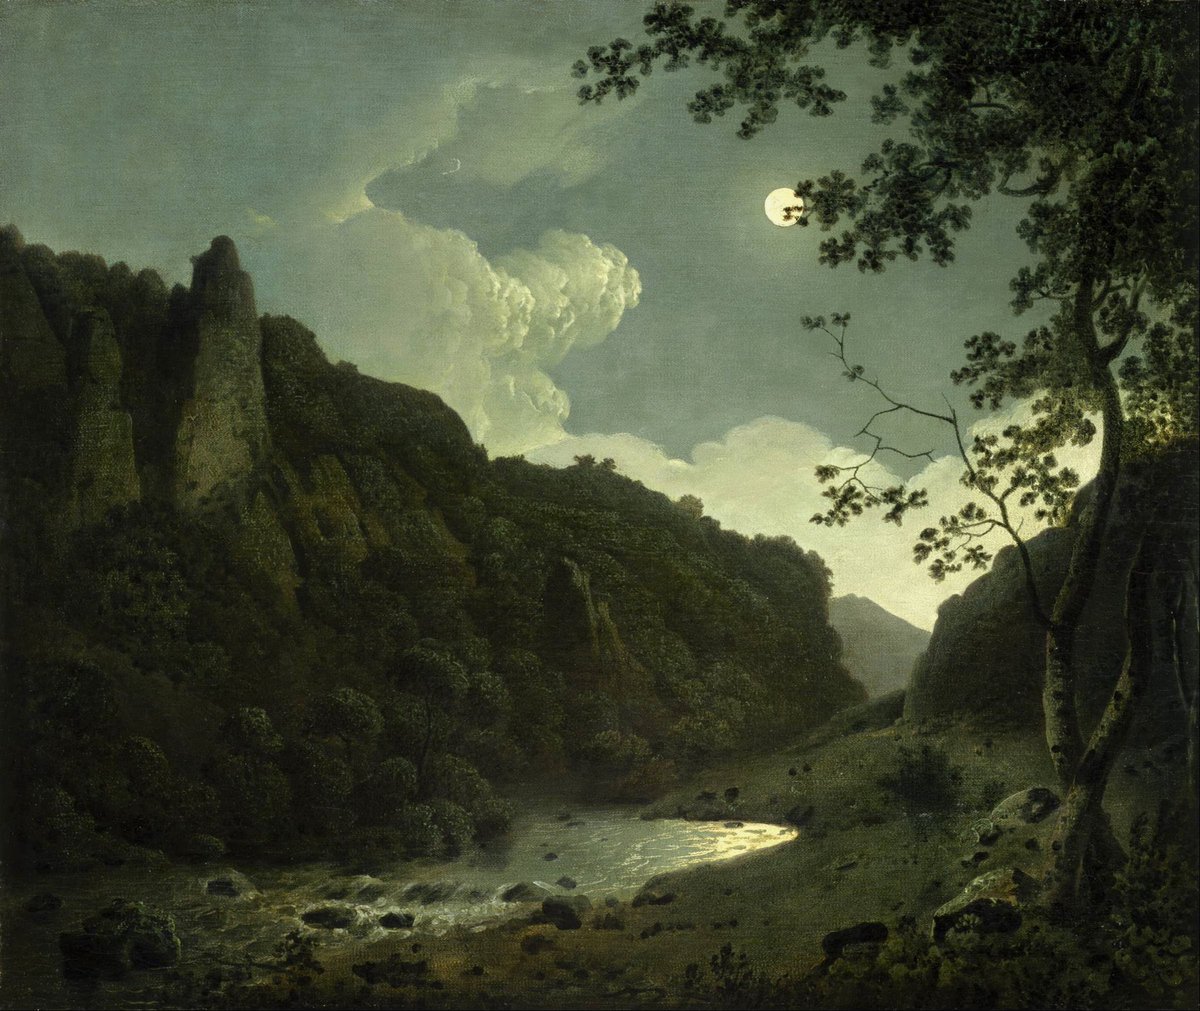 Dovedale by Moonlight by Joseph Wright of Derby 1784 Oil on Canvas (Museum of Fine Arts, Houston)